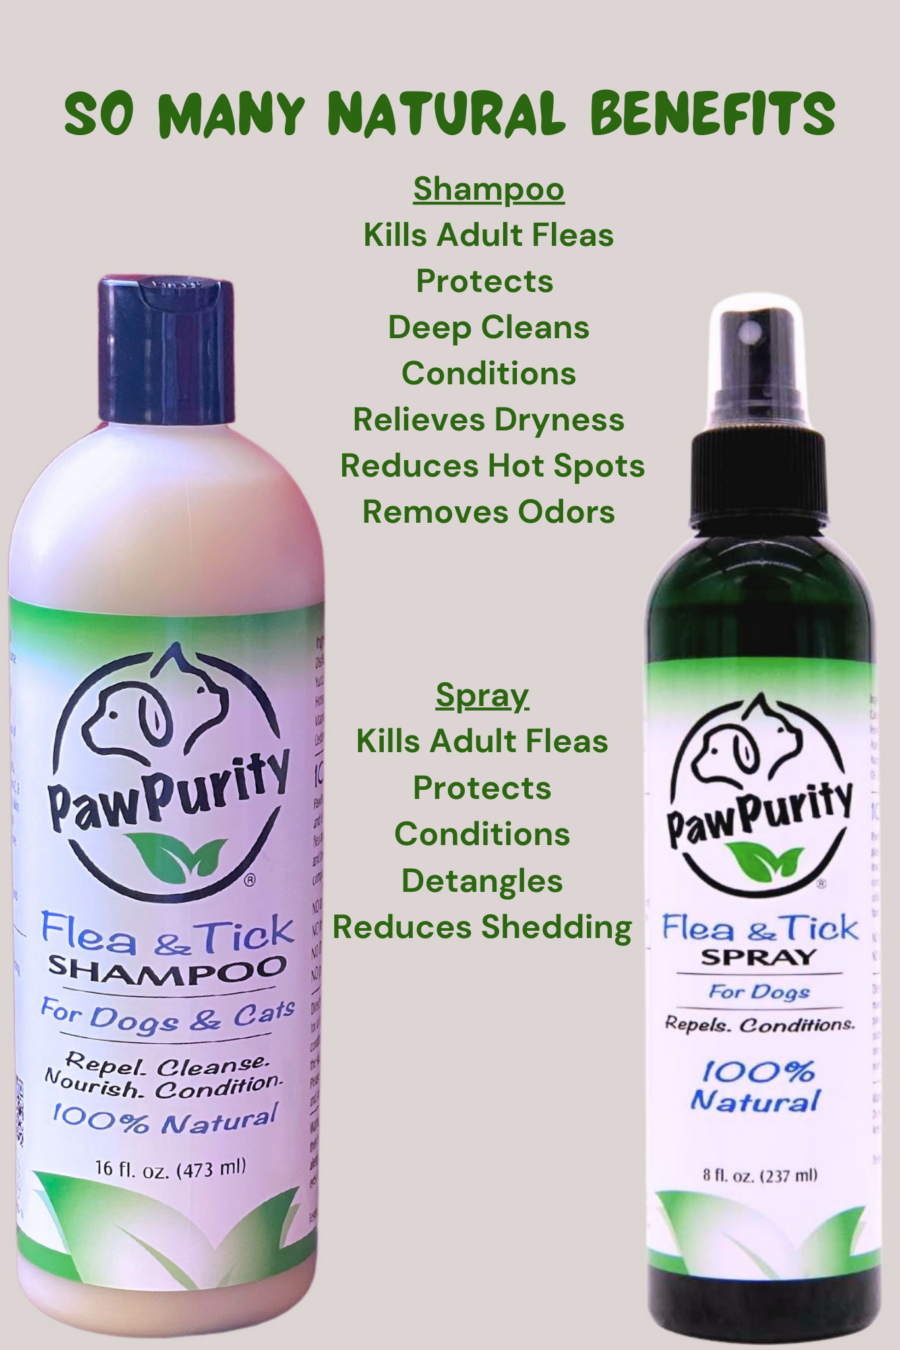 List of benefits when using PawPurity Flea & Tick Shampoo and Spray together